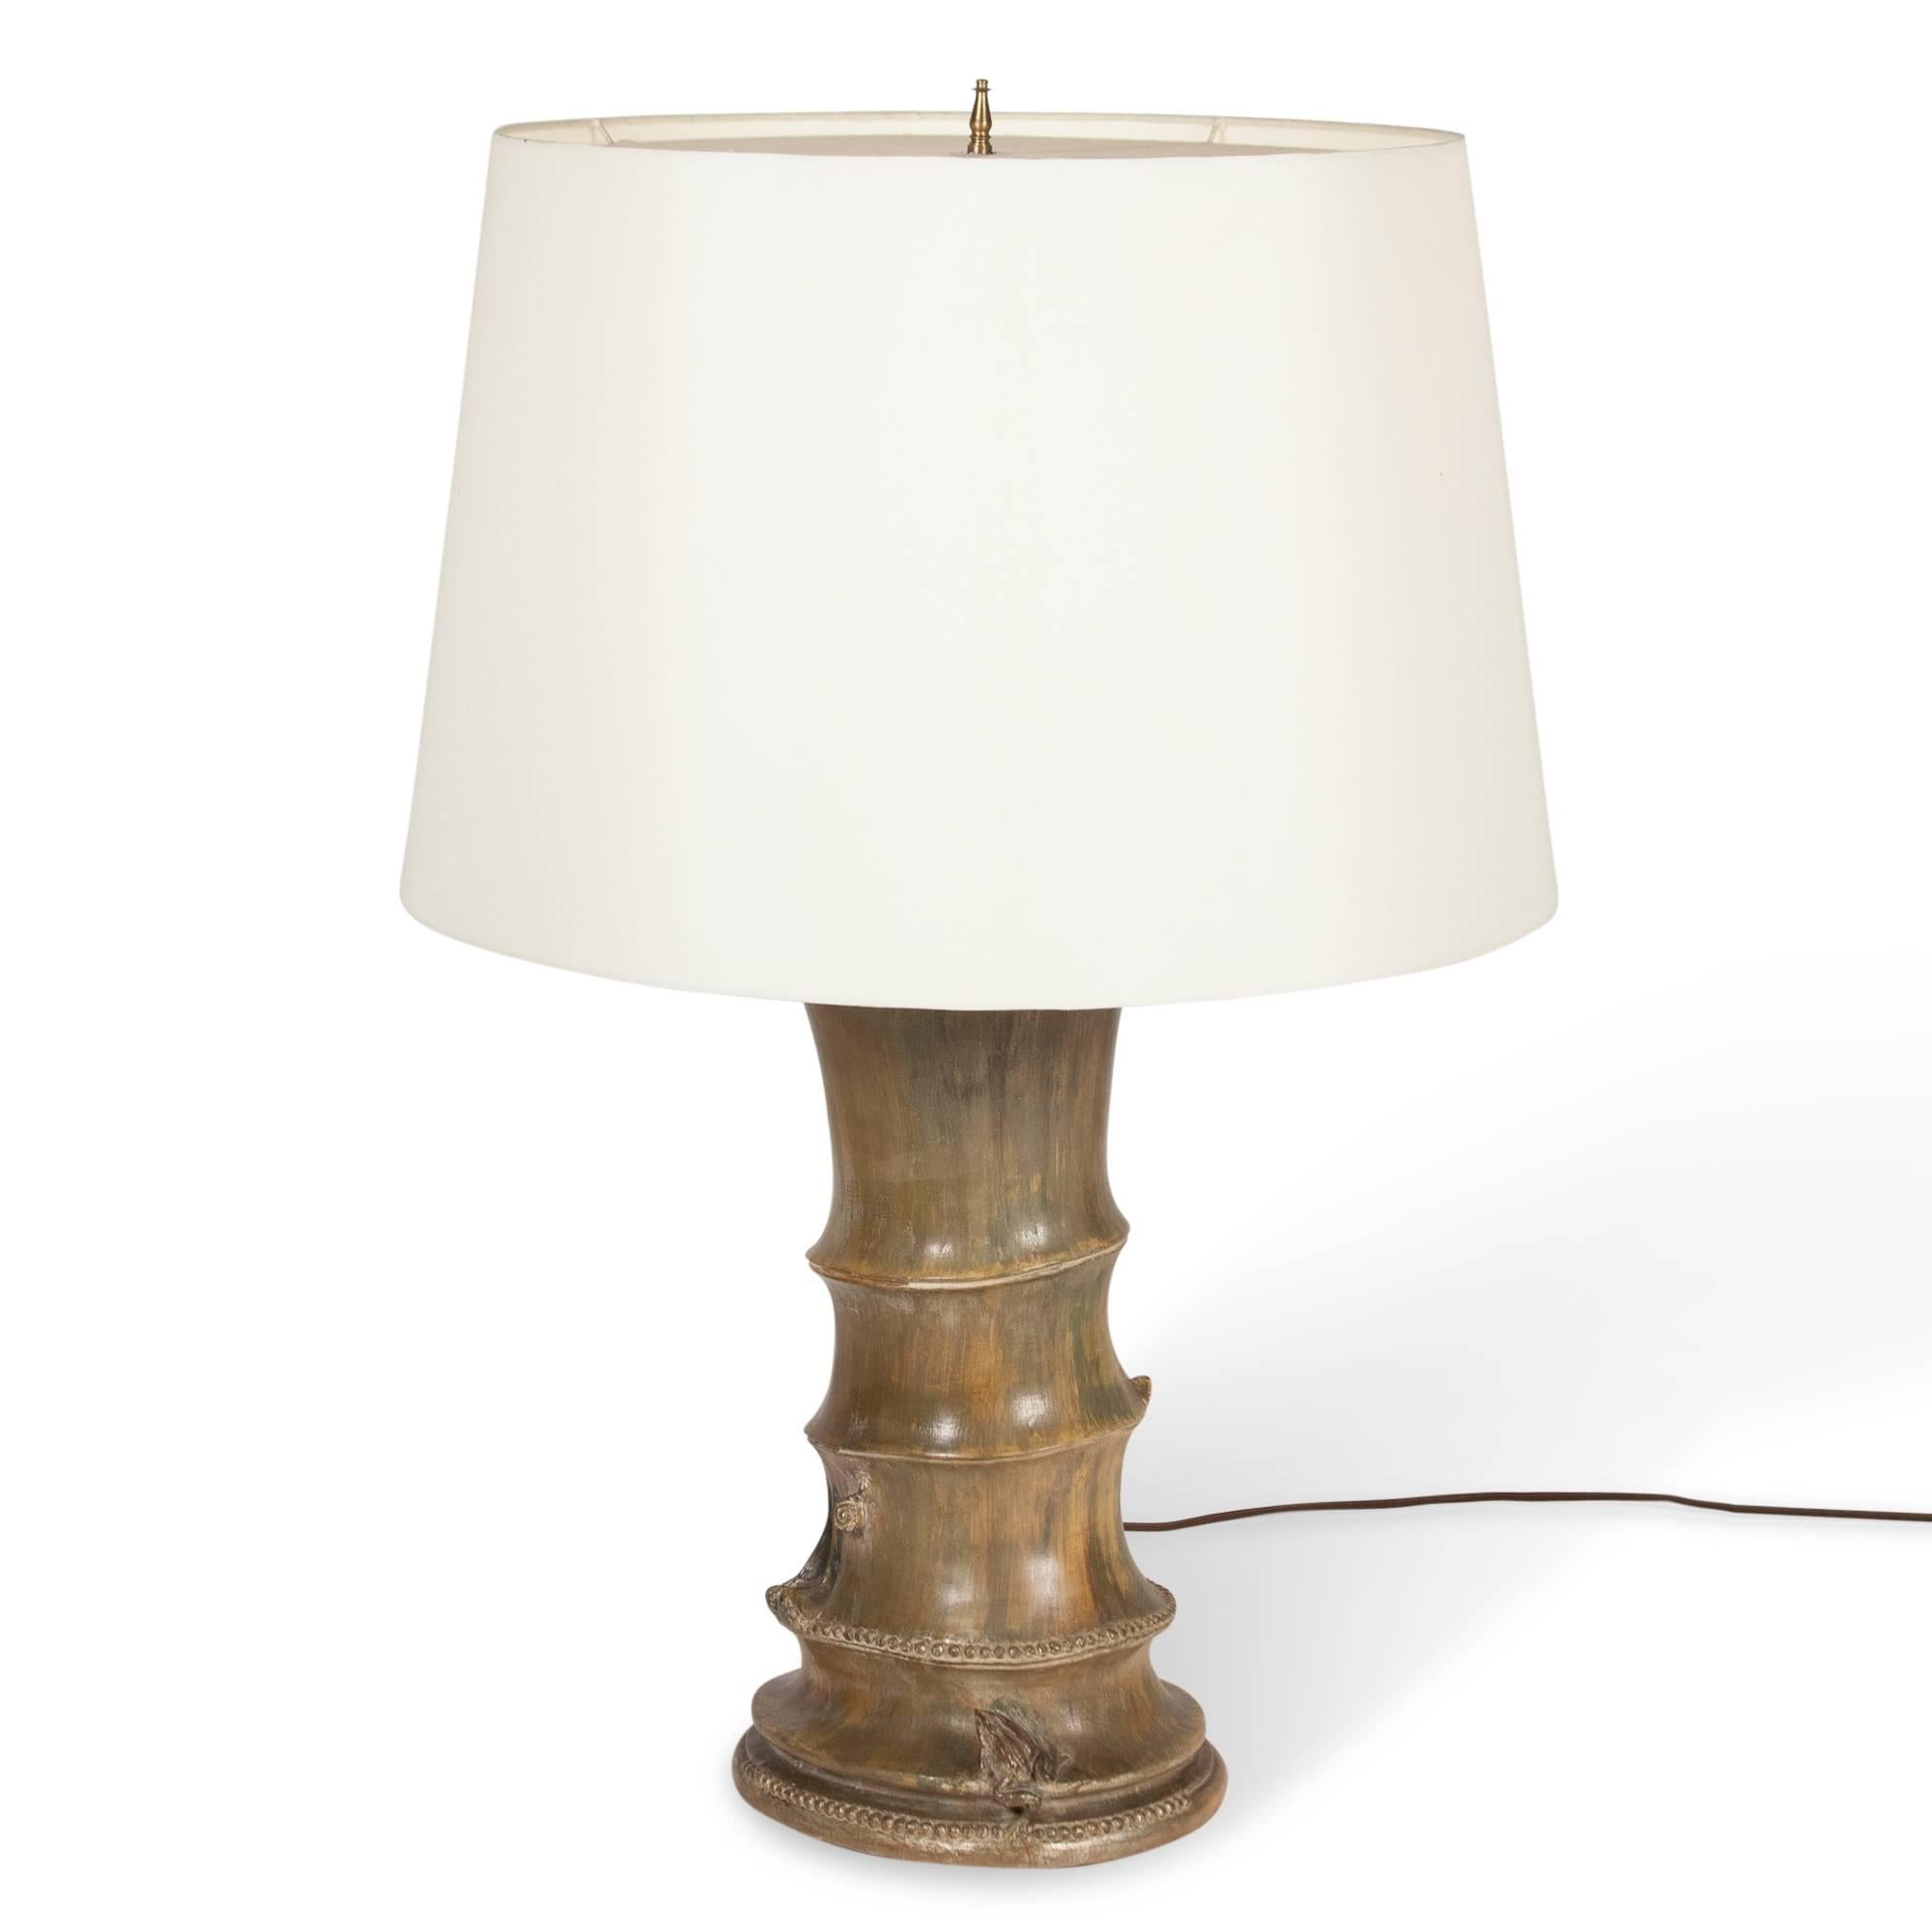 Mottled pale brown glazed ceramic table lamp, of tree trunk form with applied frog decoration by James Mont, American, 1950s. In custom silk shade. Measures: 9 ½ in. D, 31 ¾ in. H, 21 in. D shade at widest. 